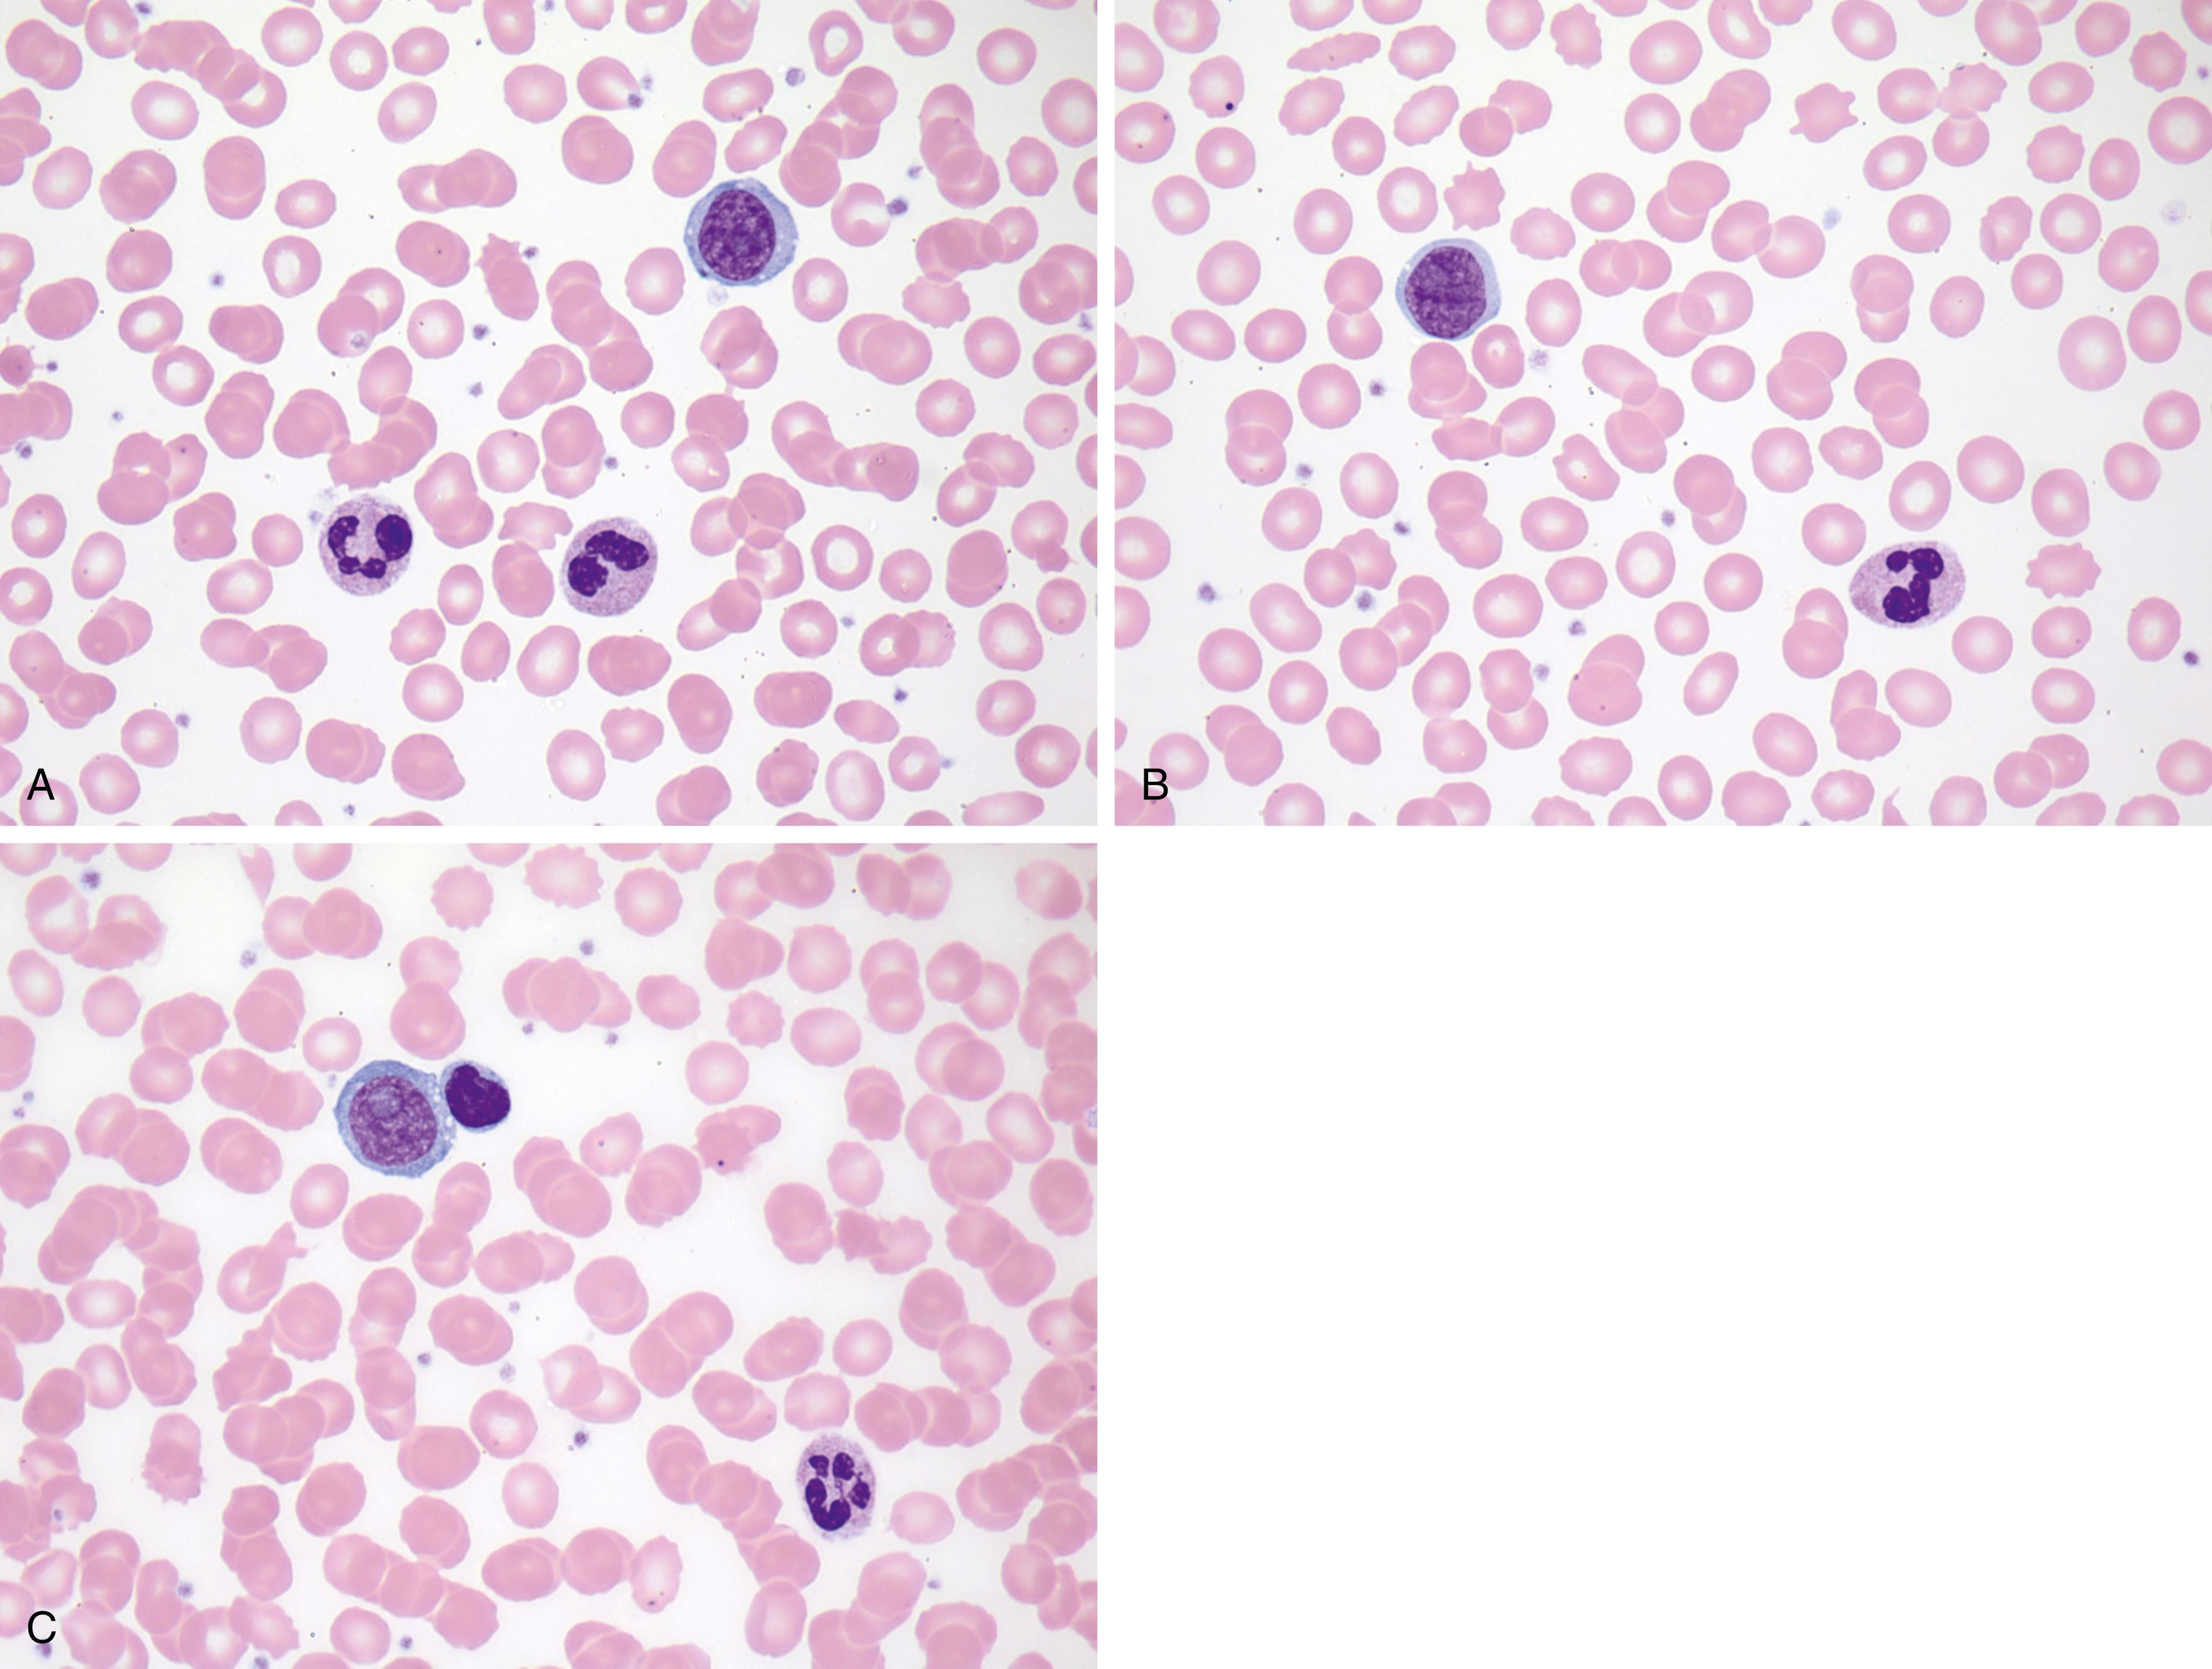 Fig. 10.22, Residual B-cell prolymphocytic leukemia after chemotherapy (peripheral blood). Prolymphocytes are infrequent on this blood smear and show nonclassic features including small cell size with (A) relatively condensed chromatin and inconspicuous nucleolus, or (B) small nucleoli and a suggestion of a nuclear groove. (C) Occasional classic prolymphocytes are also present.